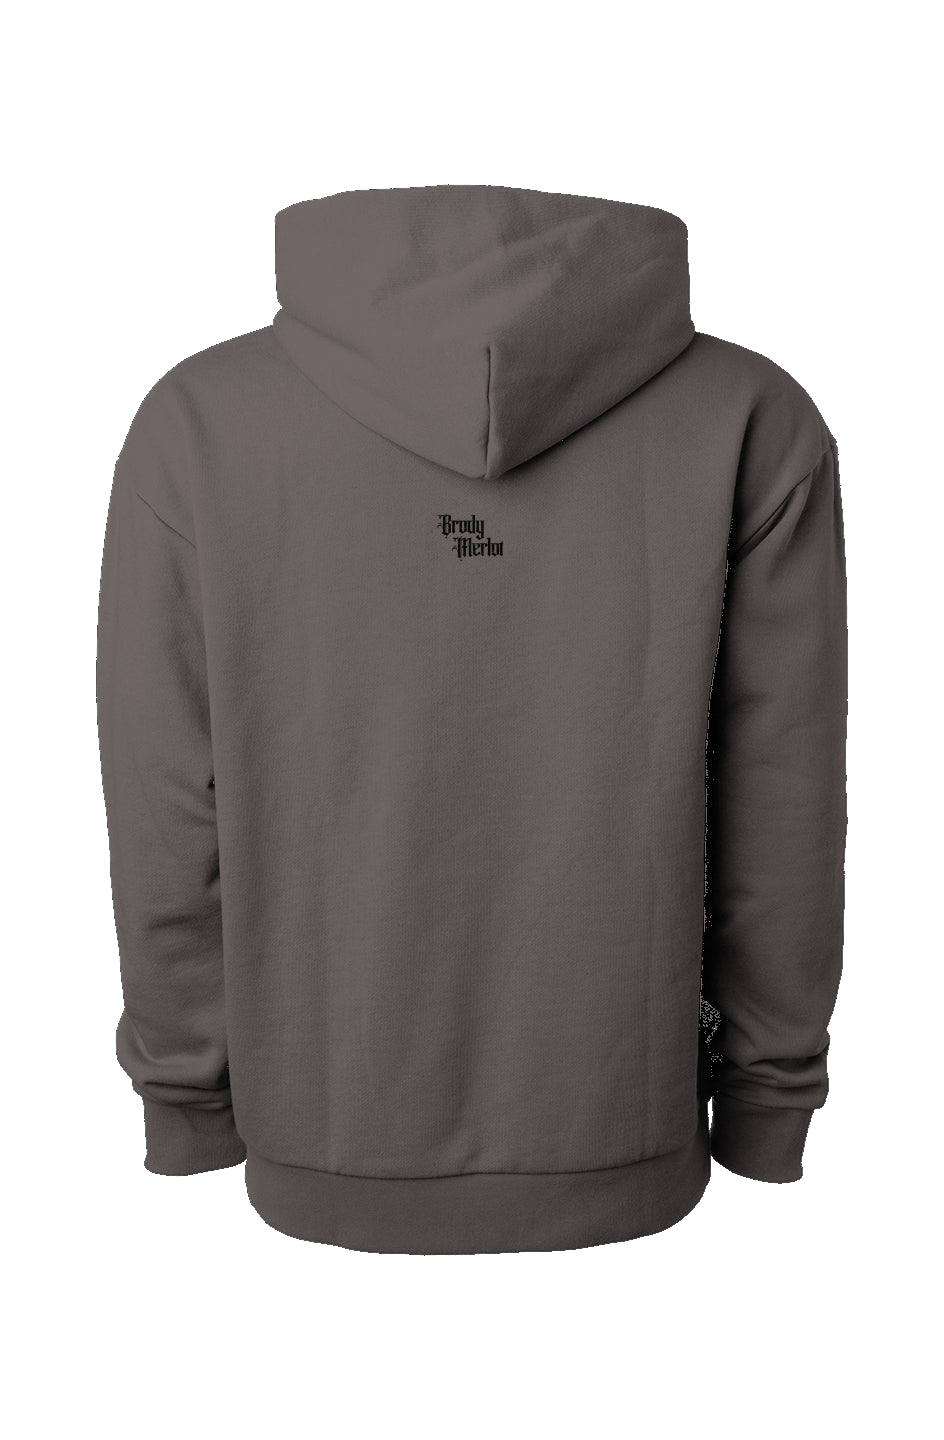 Lost Tapes of Da 3rd Hooded Sweatshirt 